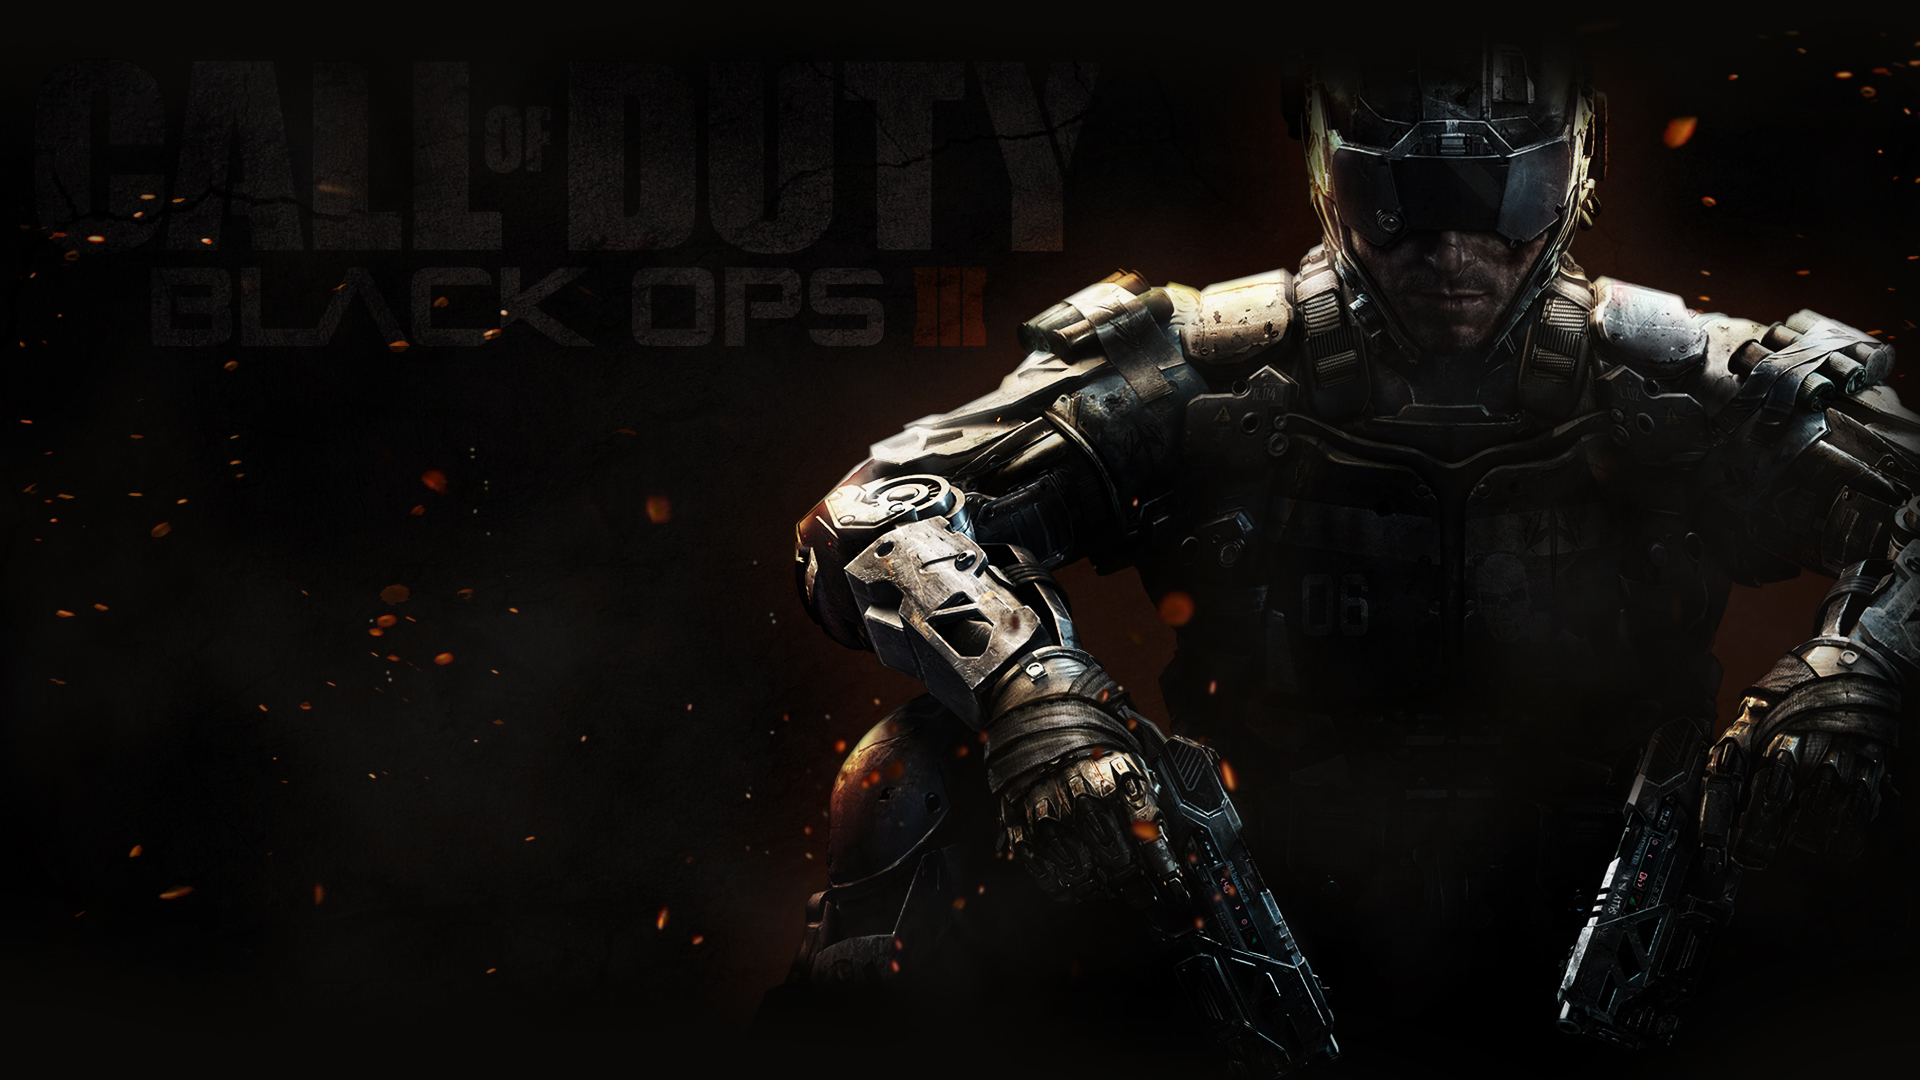 Black Ops 3 Wallpapers Black Ops 3 Forums 1920x1080